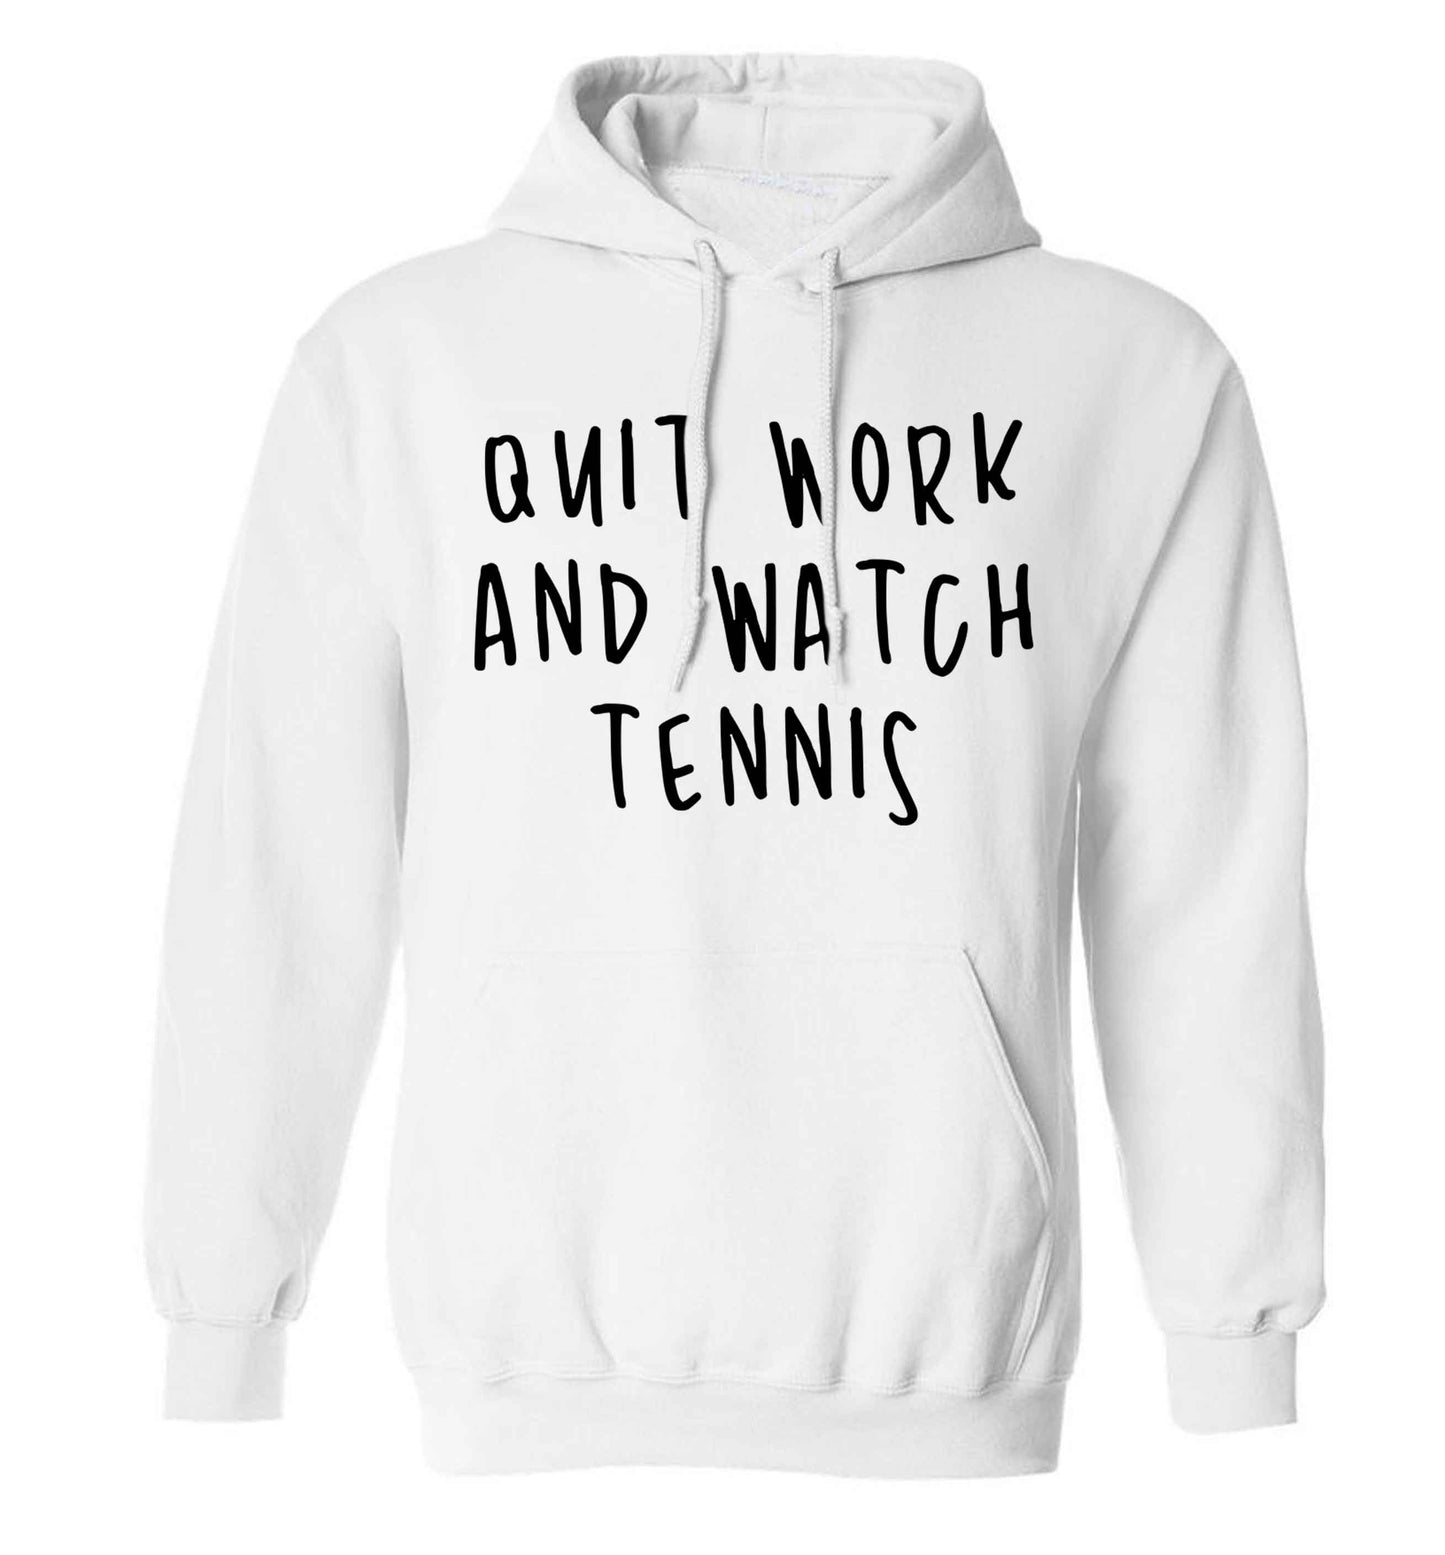 Quit work and watch tennis adults unisex white hoodie 2XL